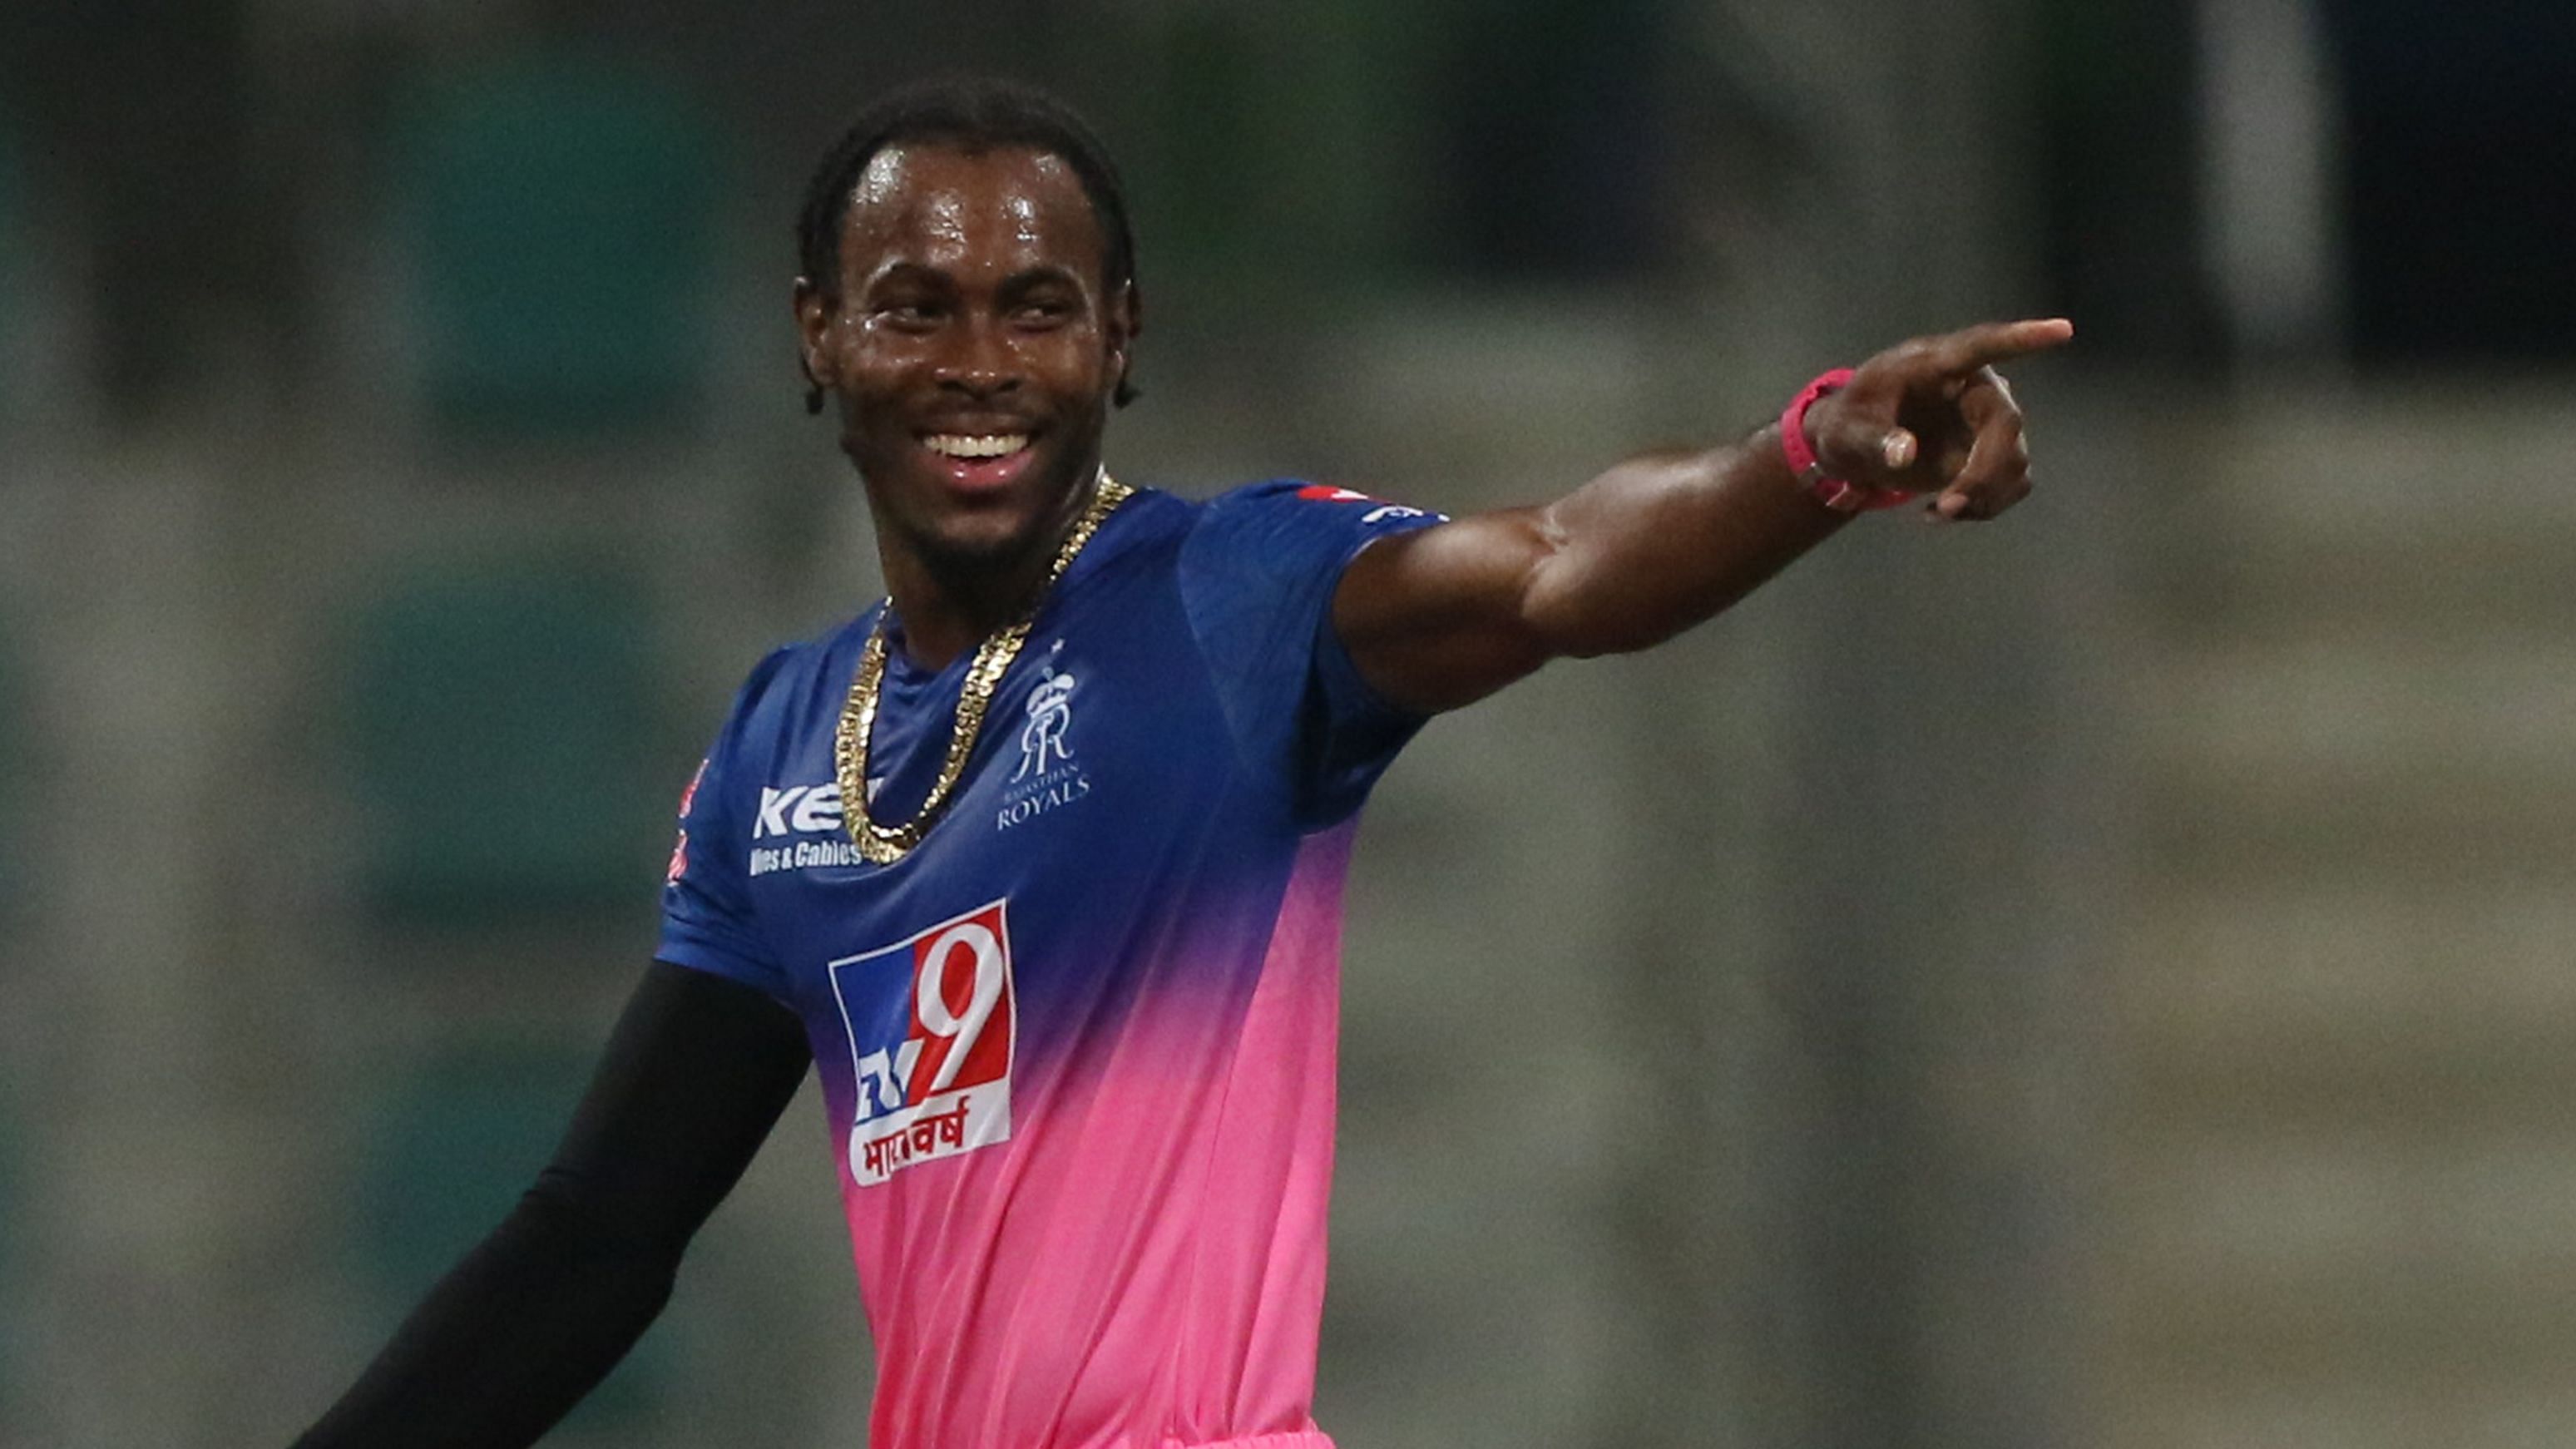 Jofra Archer will now play for MI in the IPL | BCCI/IPL